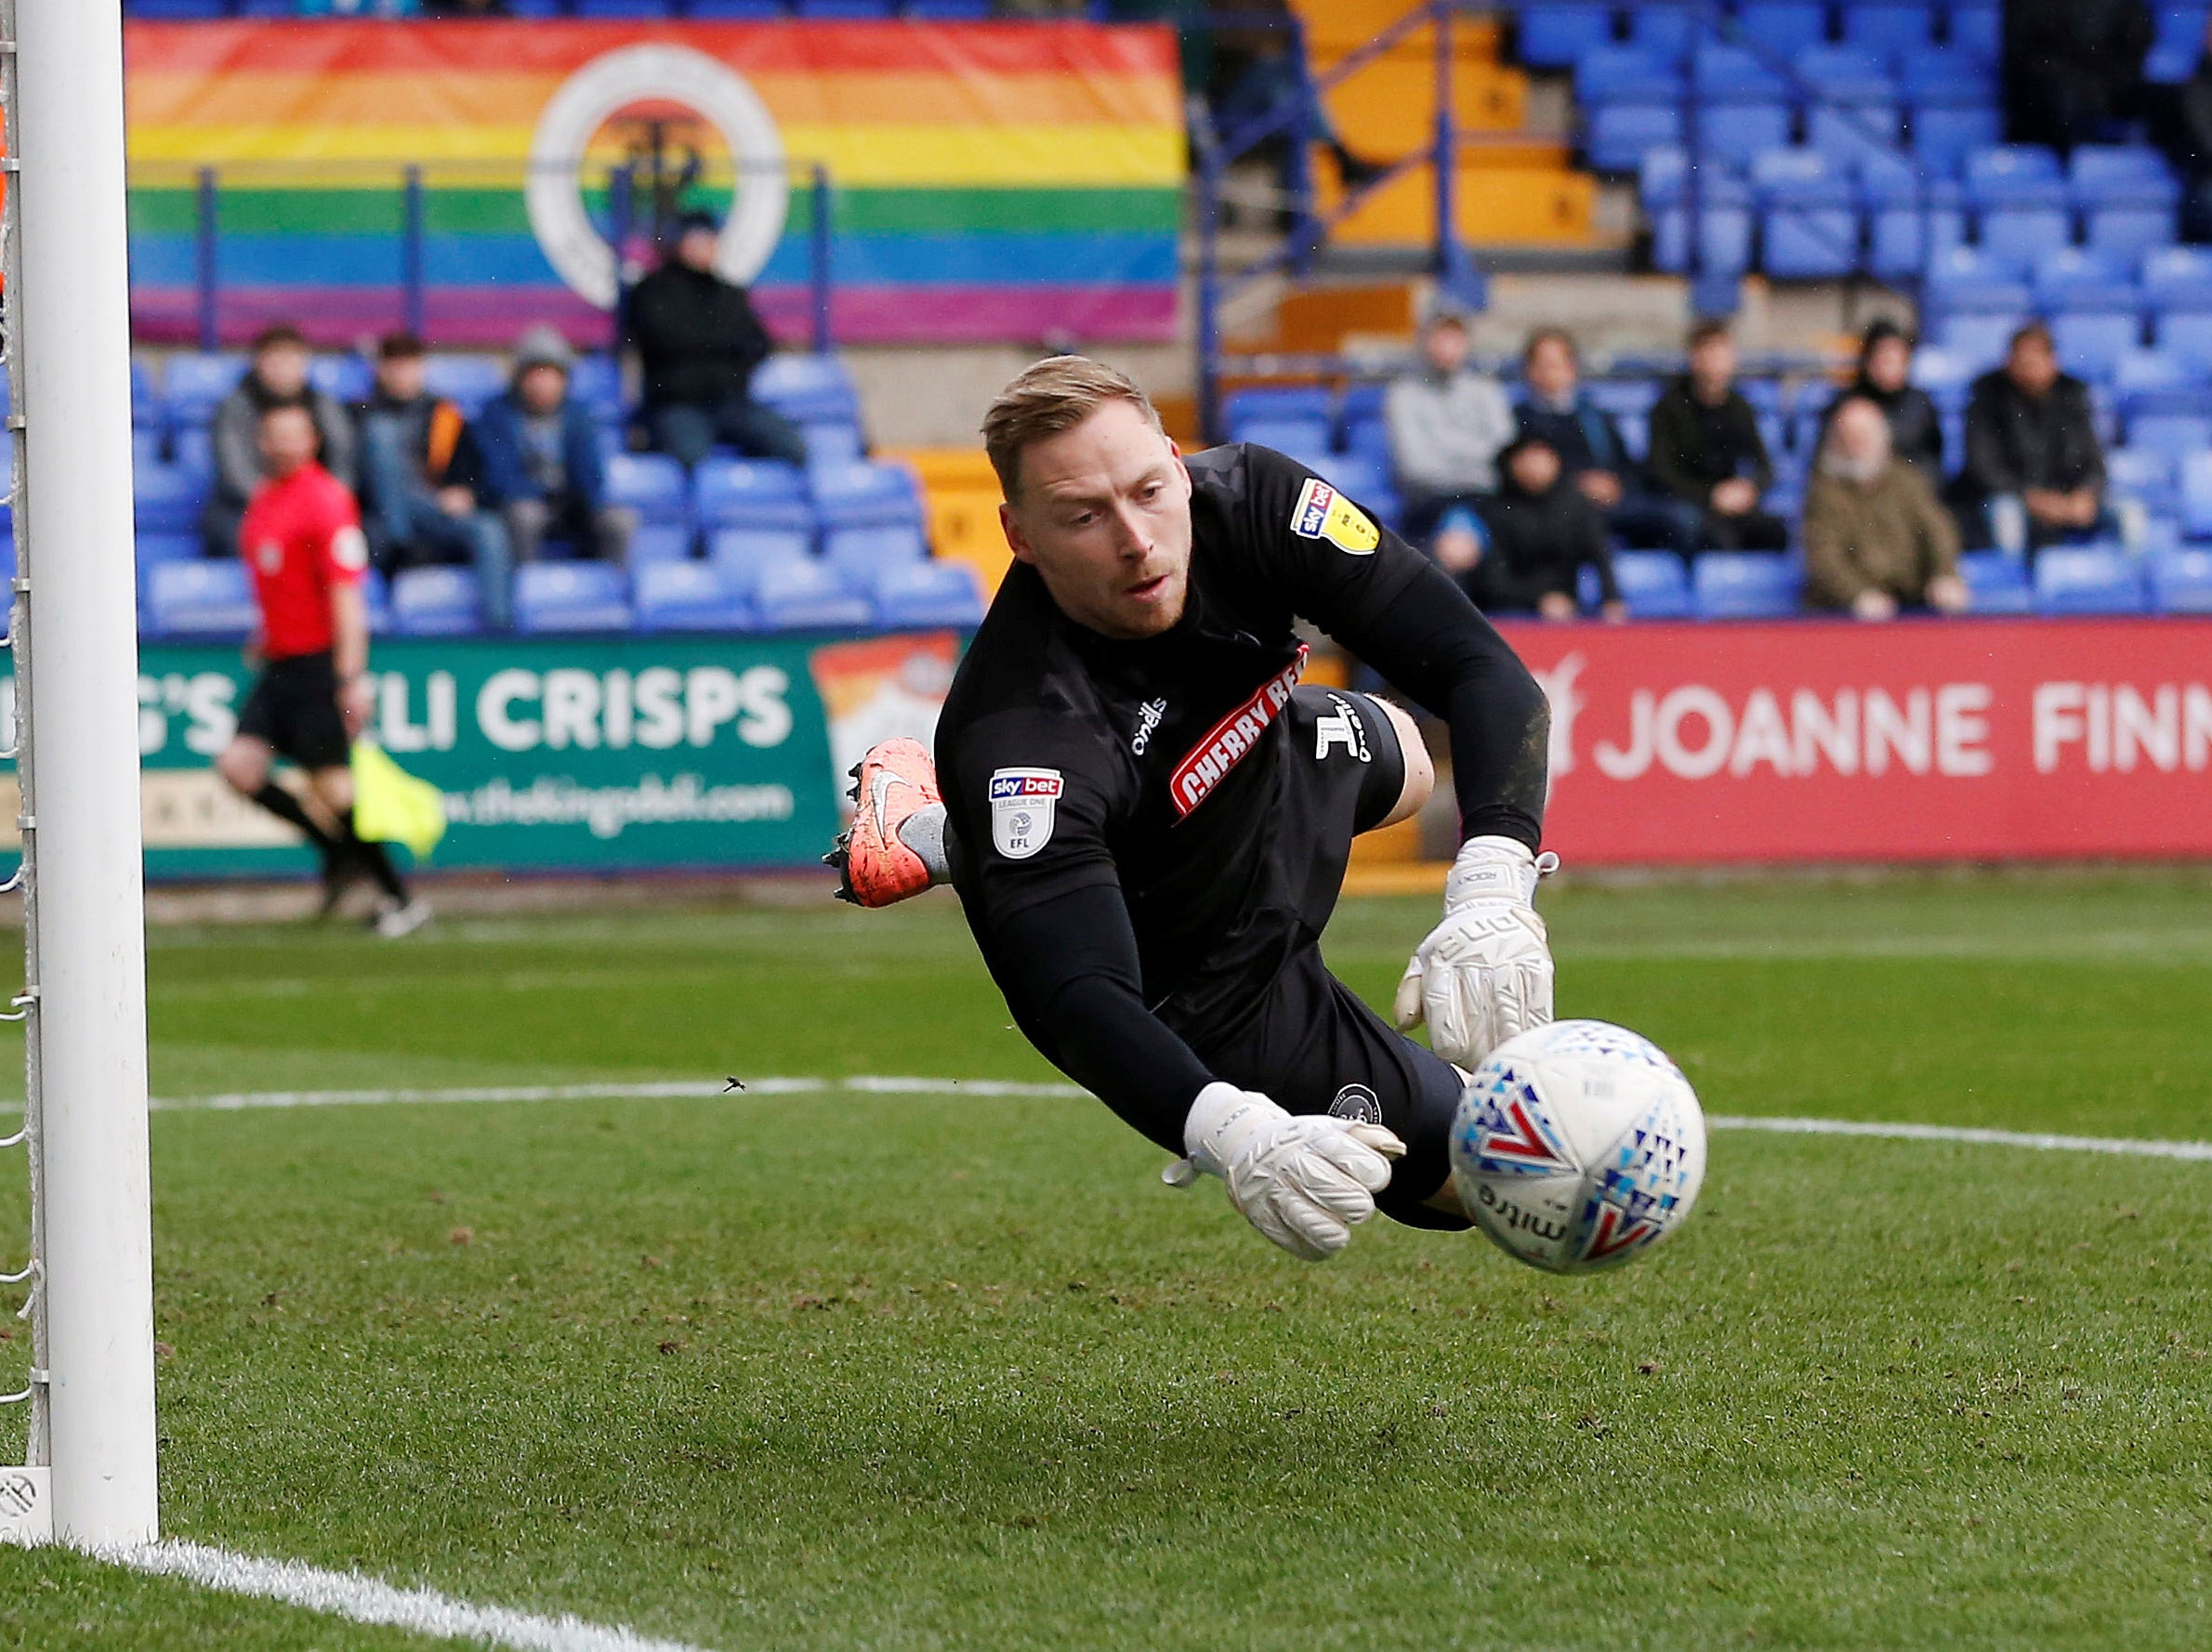 Police investigating after Wycombe goalkeeper Ryan Allsop reports  homophobic abuse at Tranmere | The Independent | The Independent